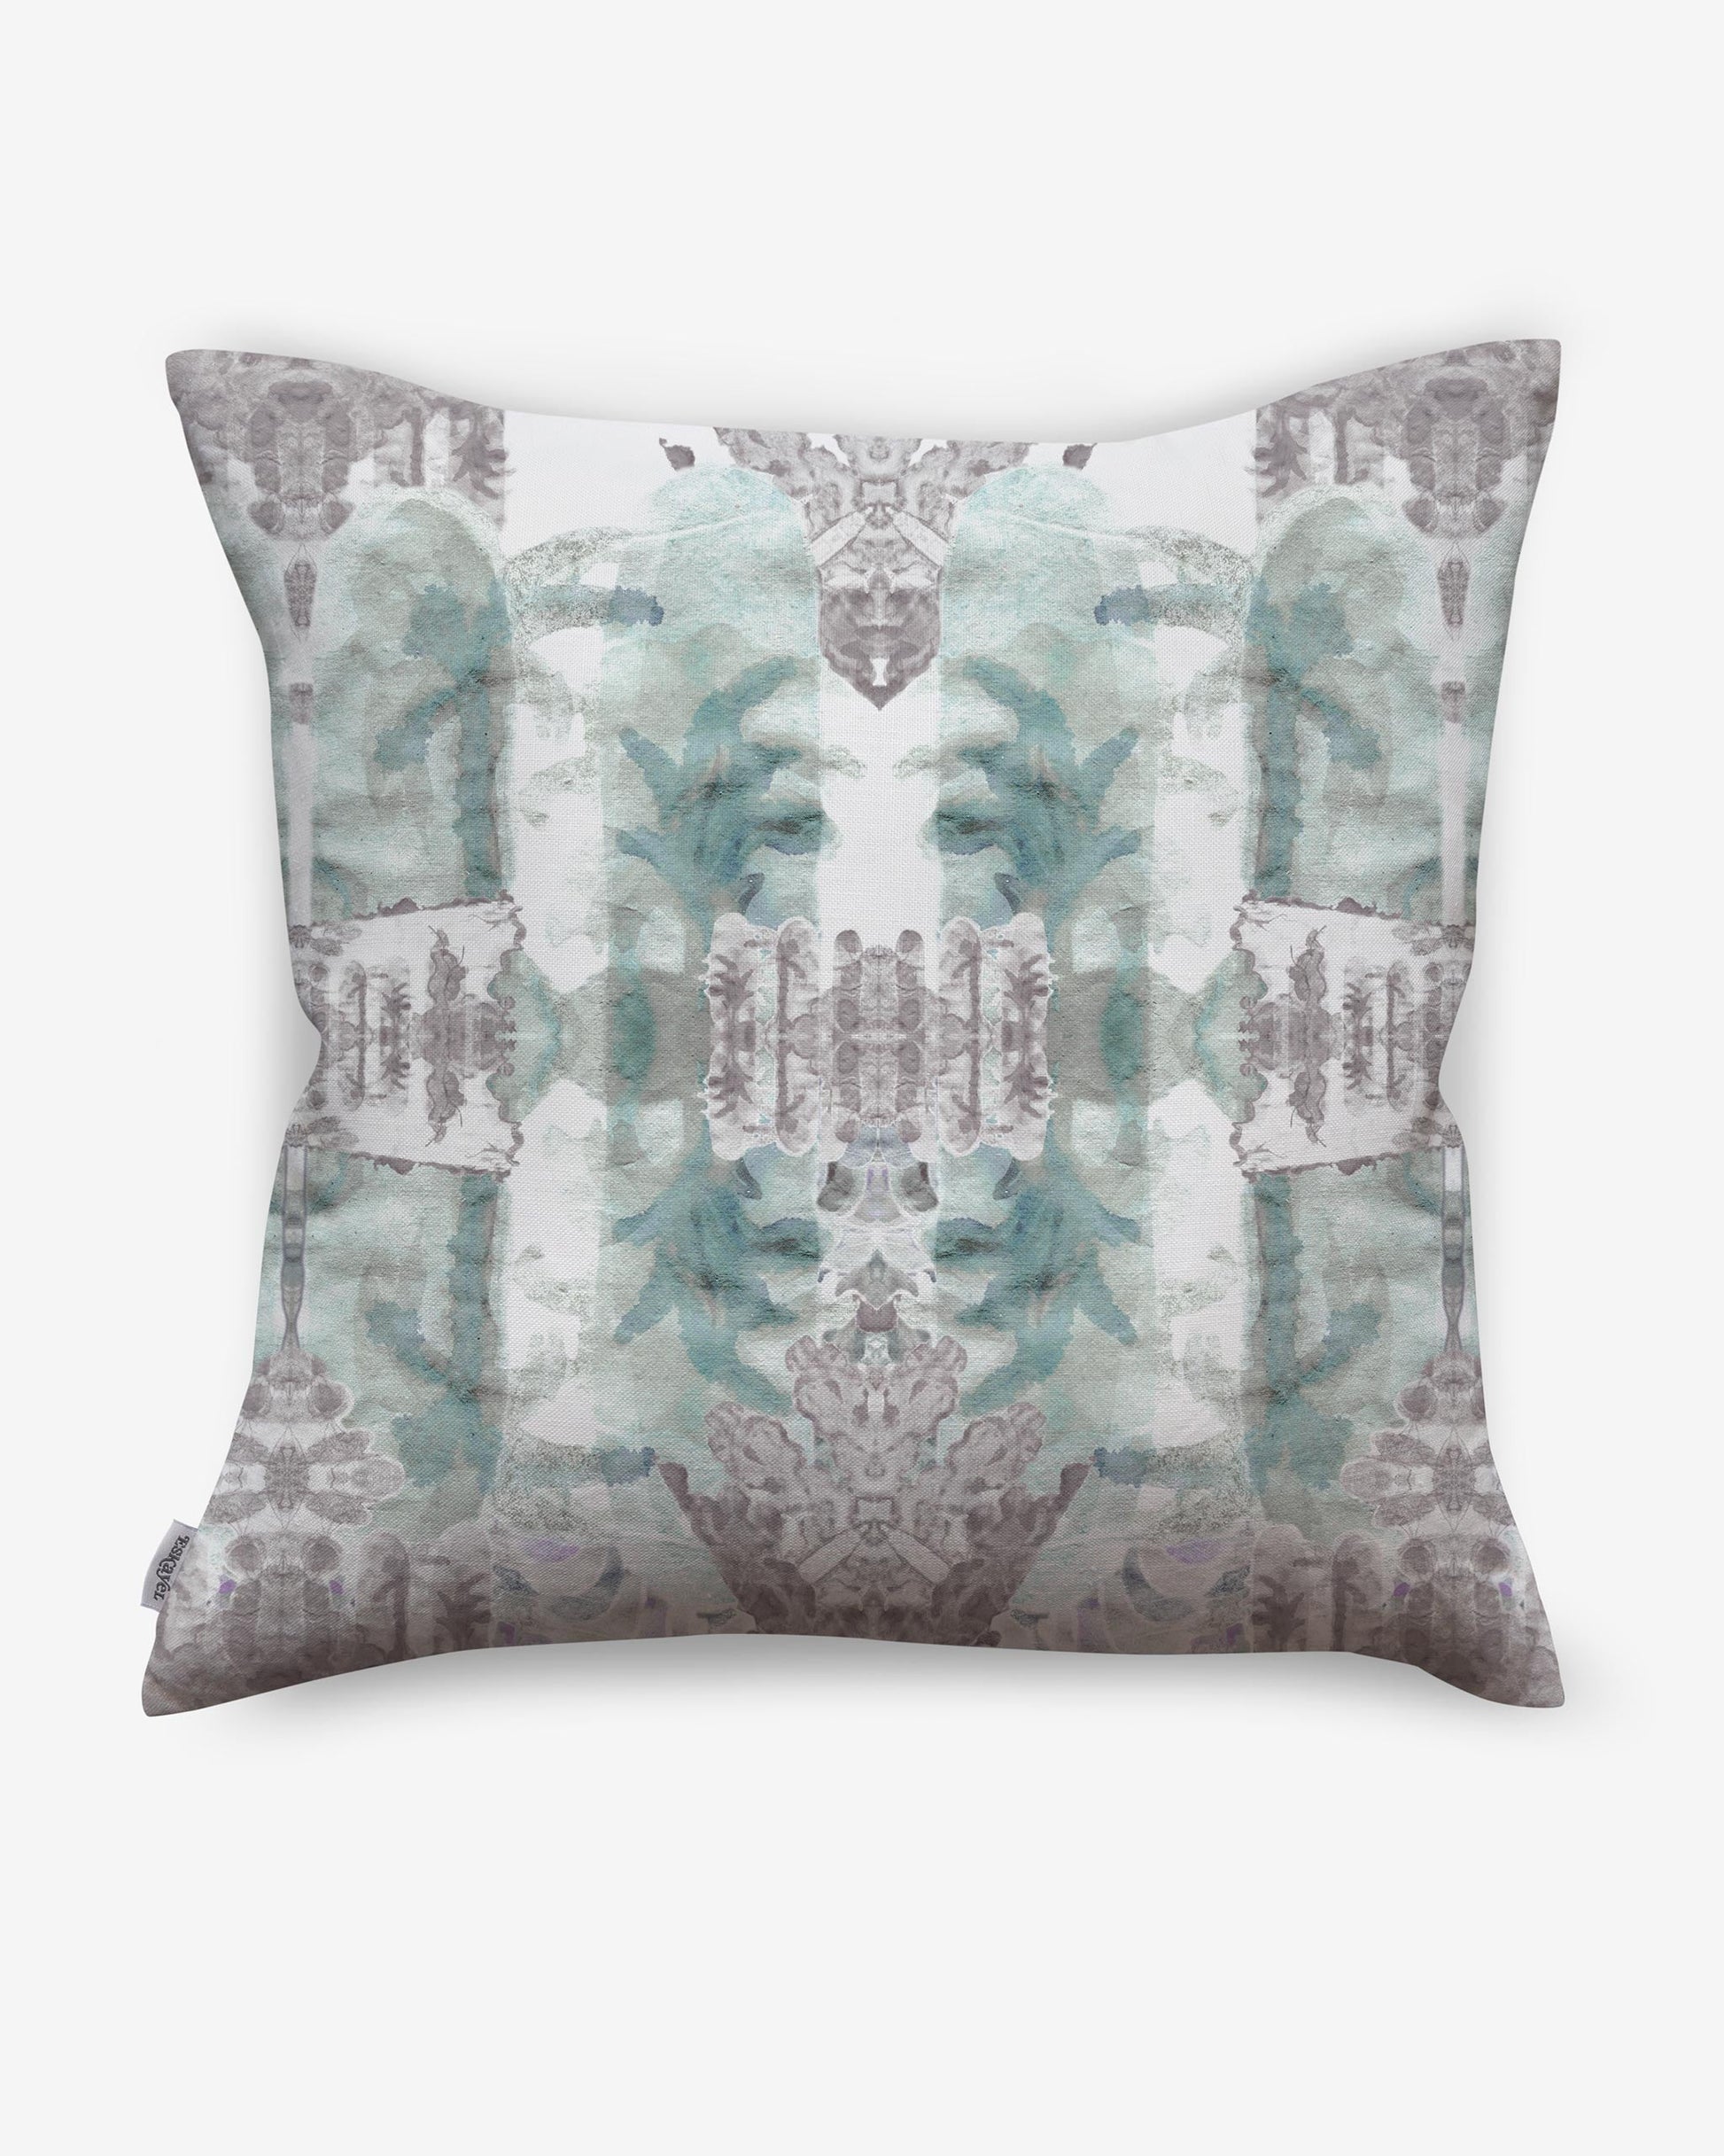 A Clairmont Pillow Sea with an abstract design from the Eskayel Presidio Collection